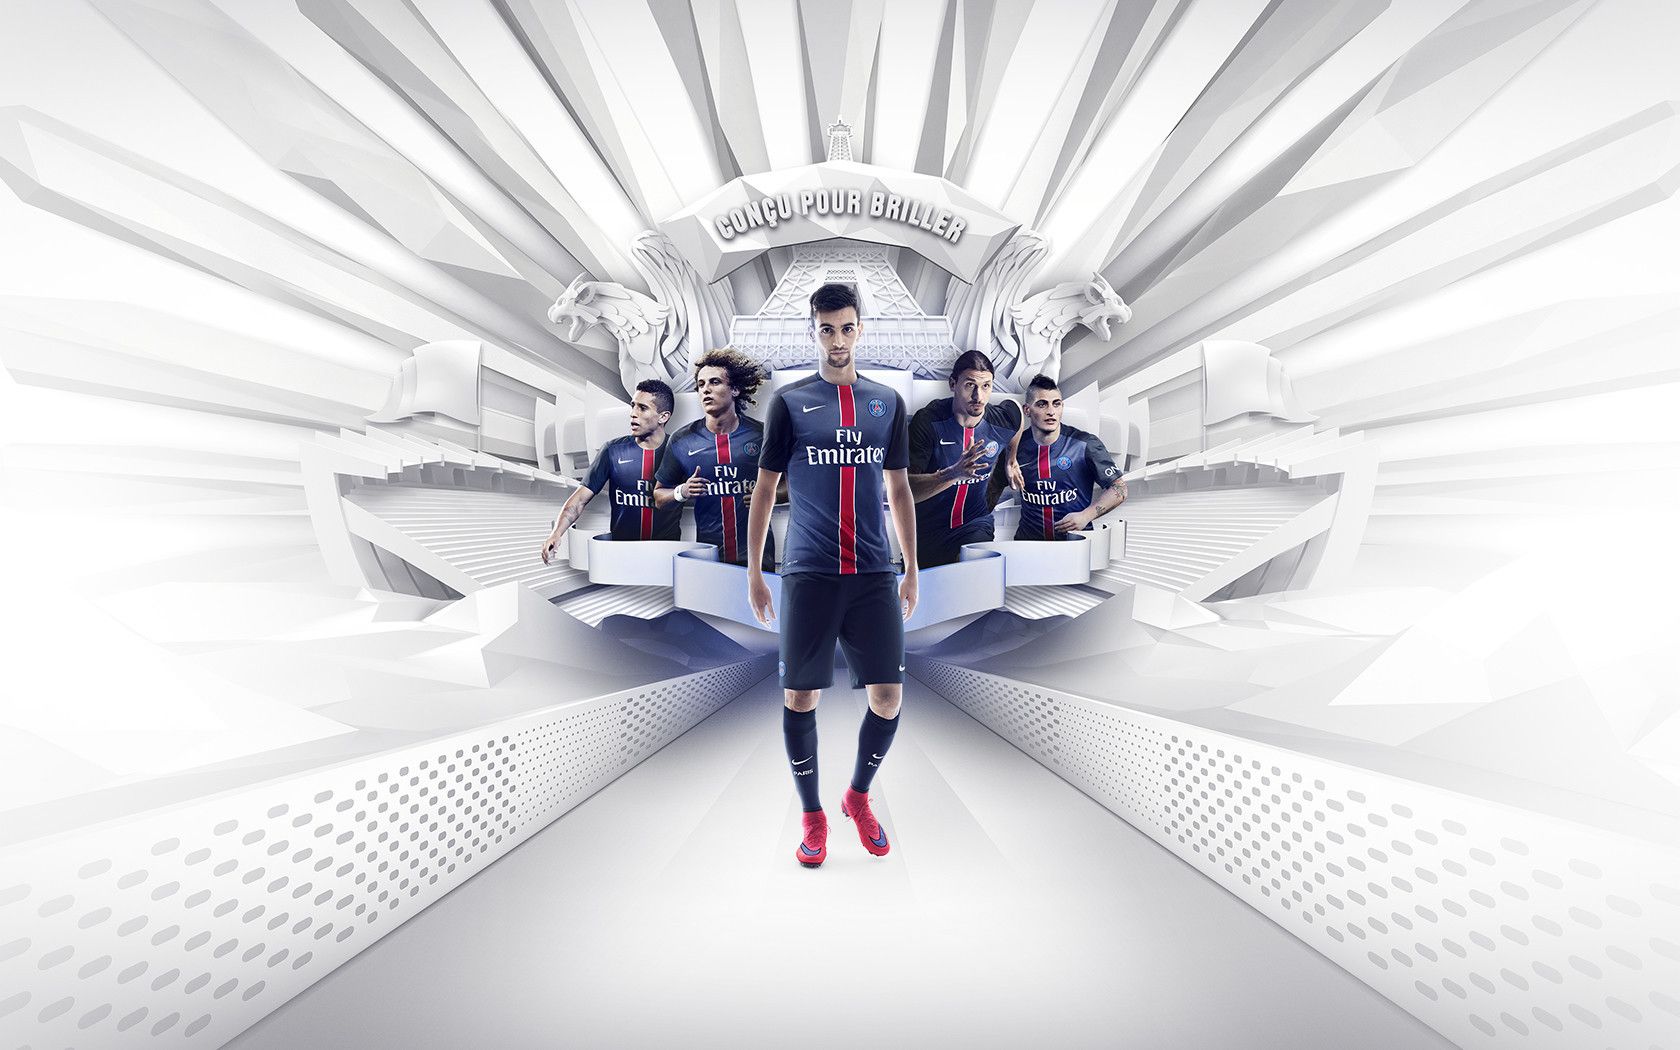 Wallpapers - Fans - PSG.fr